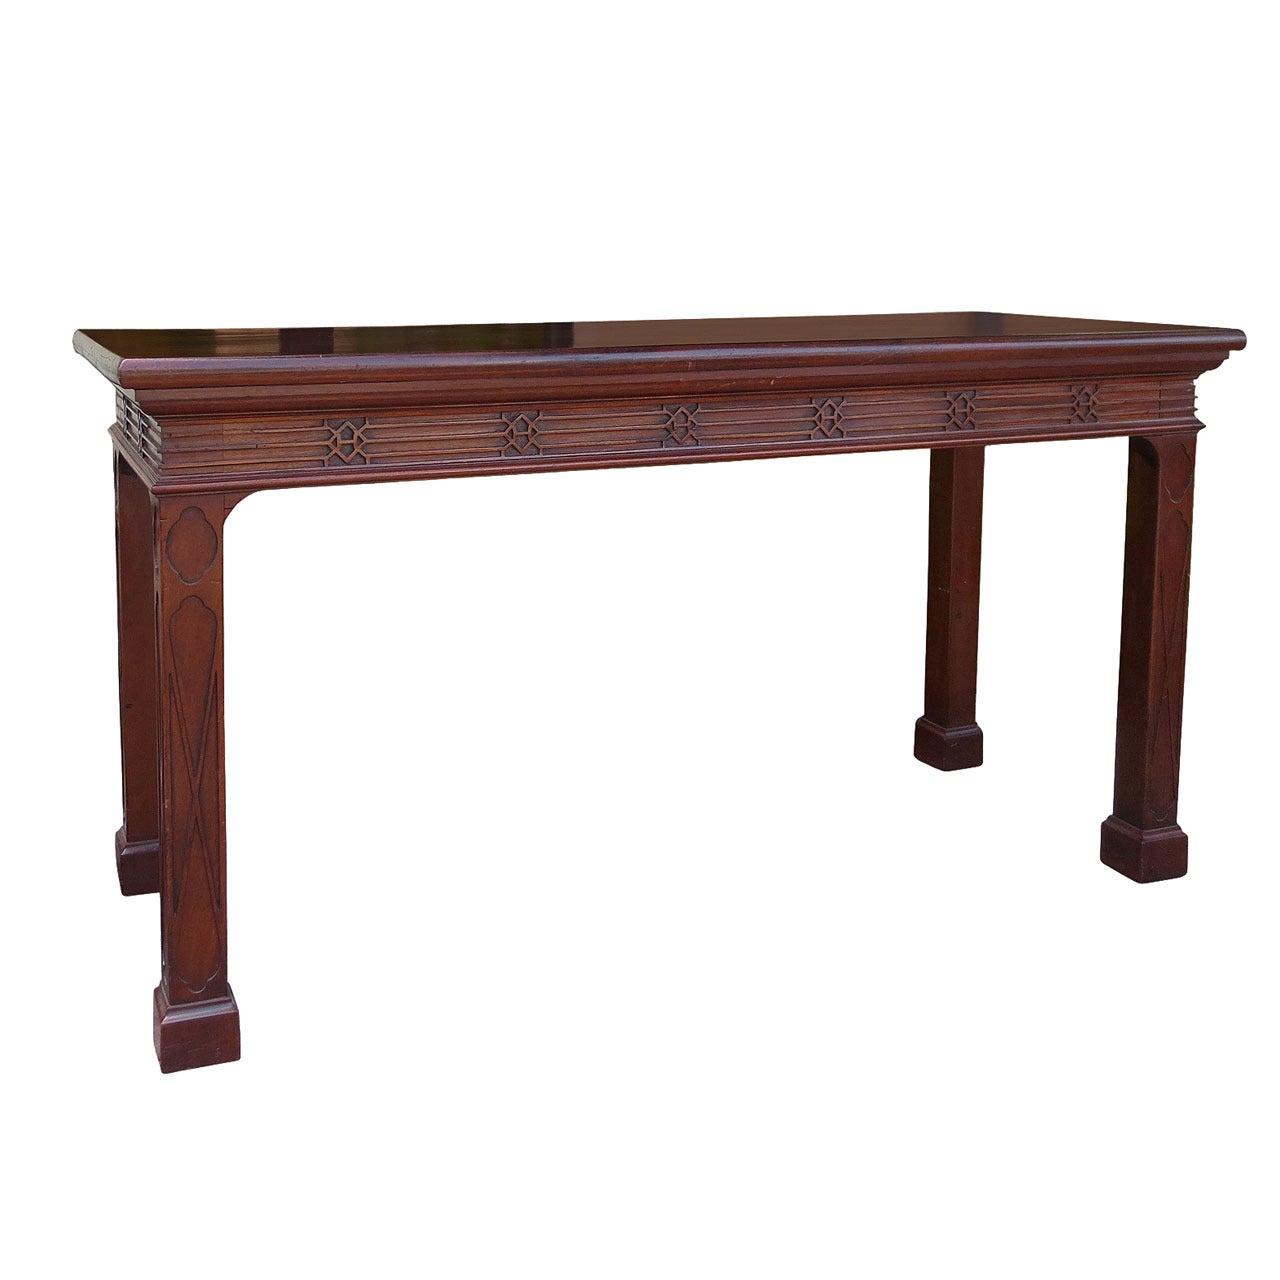 18th-19th Century English, Blind Fretwork Serving Table